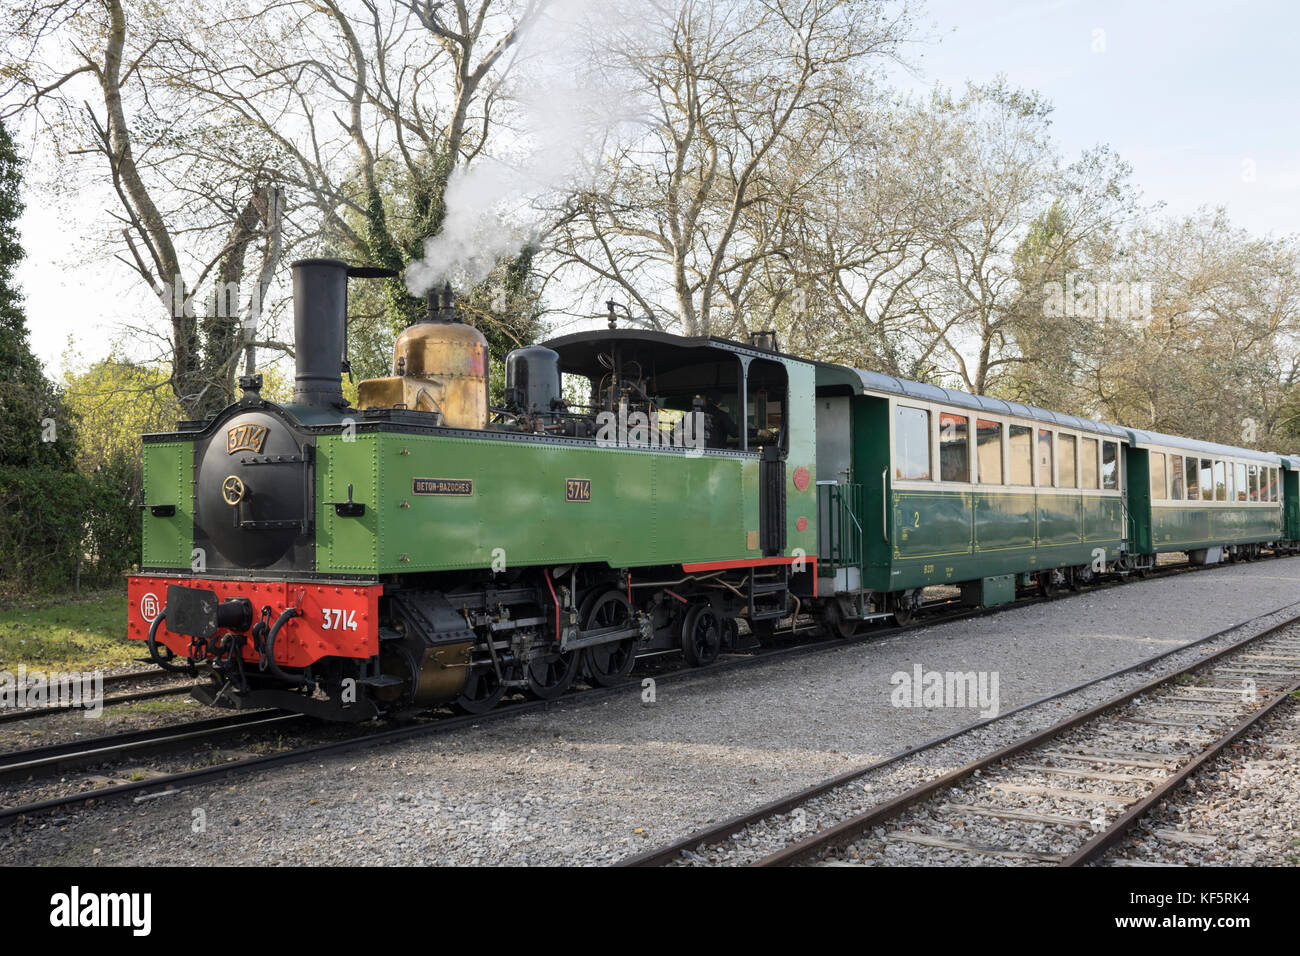 Bay of the Somme Railway, Picardy France. Steam hauled train at Le Crotoy Stock Photo